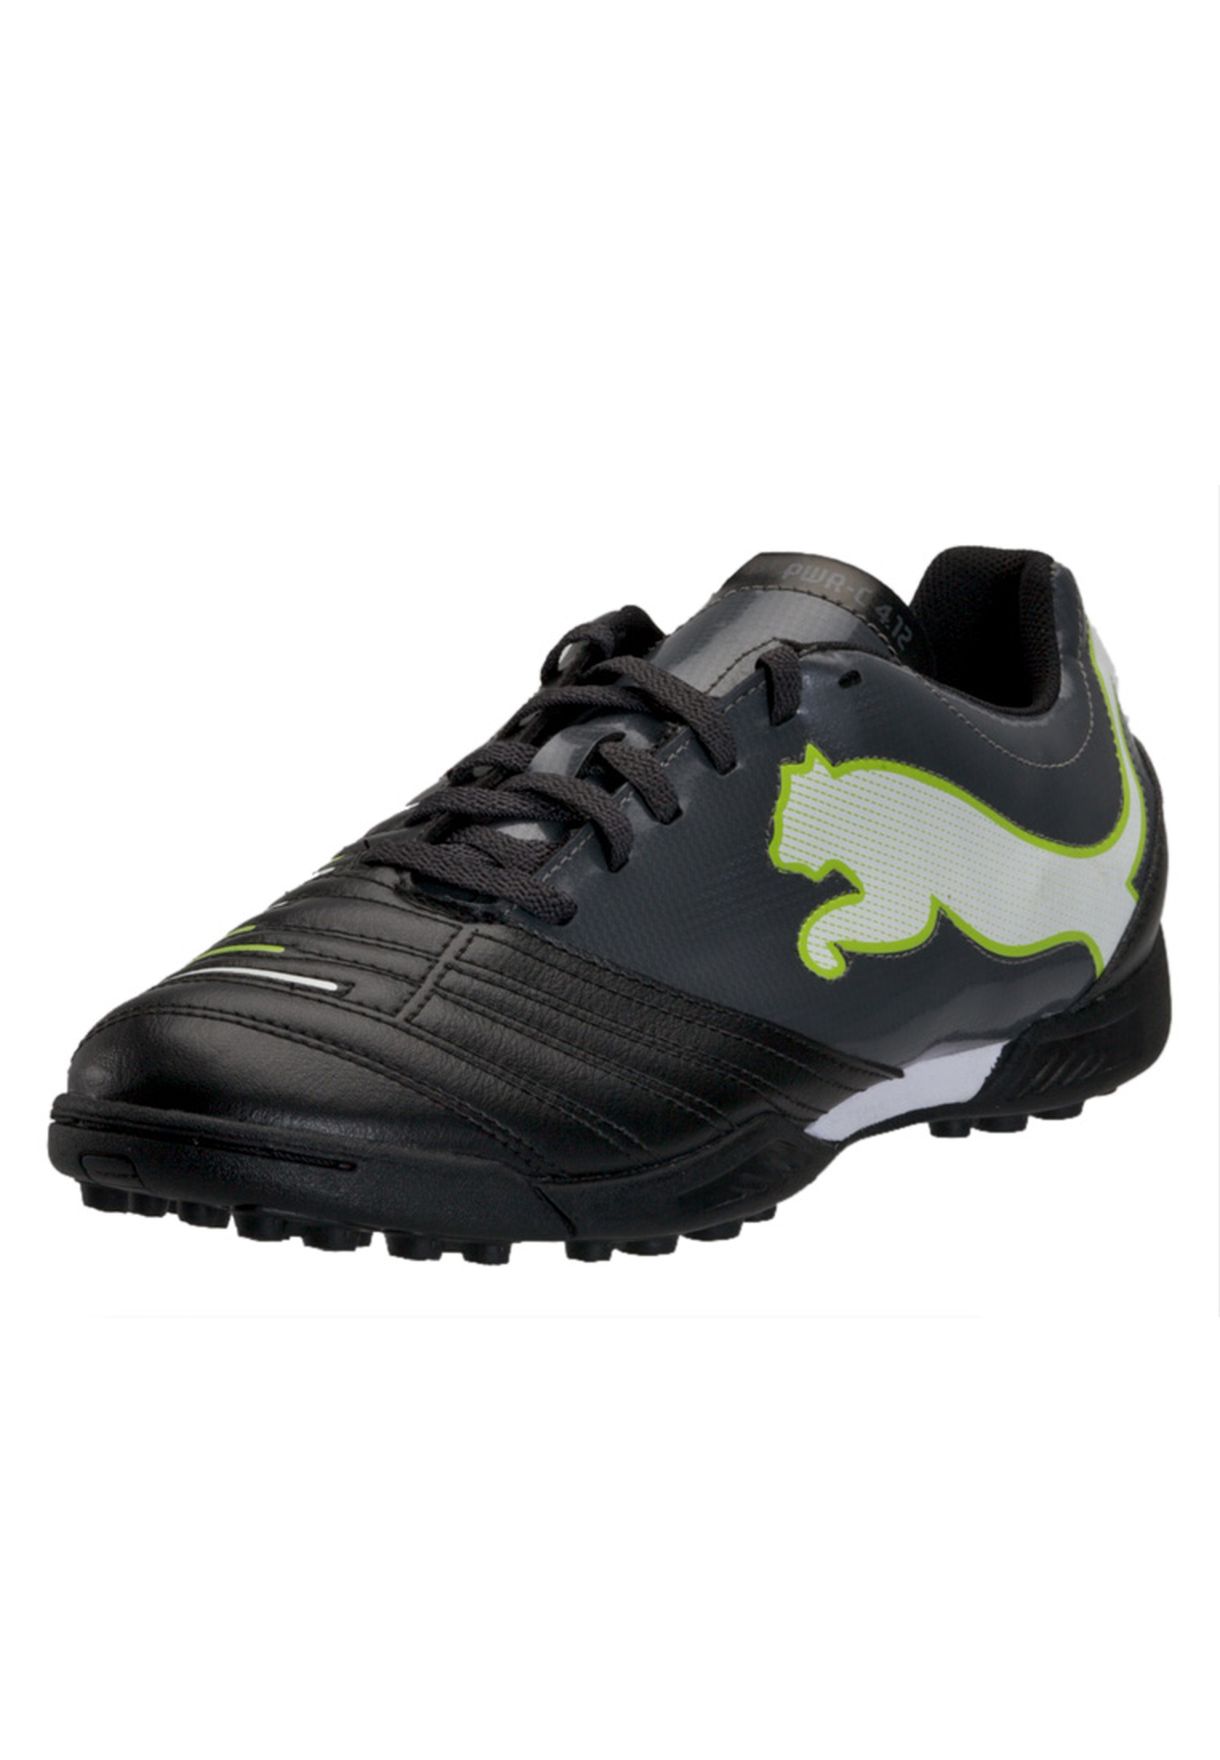 casual football shoes